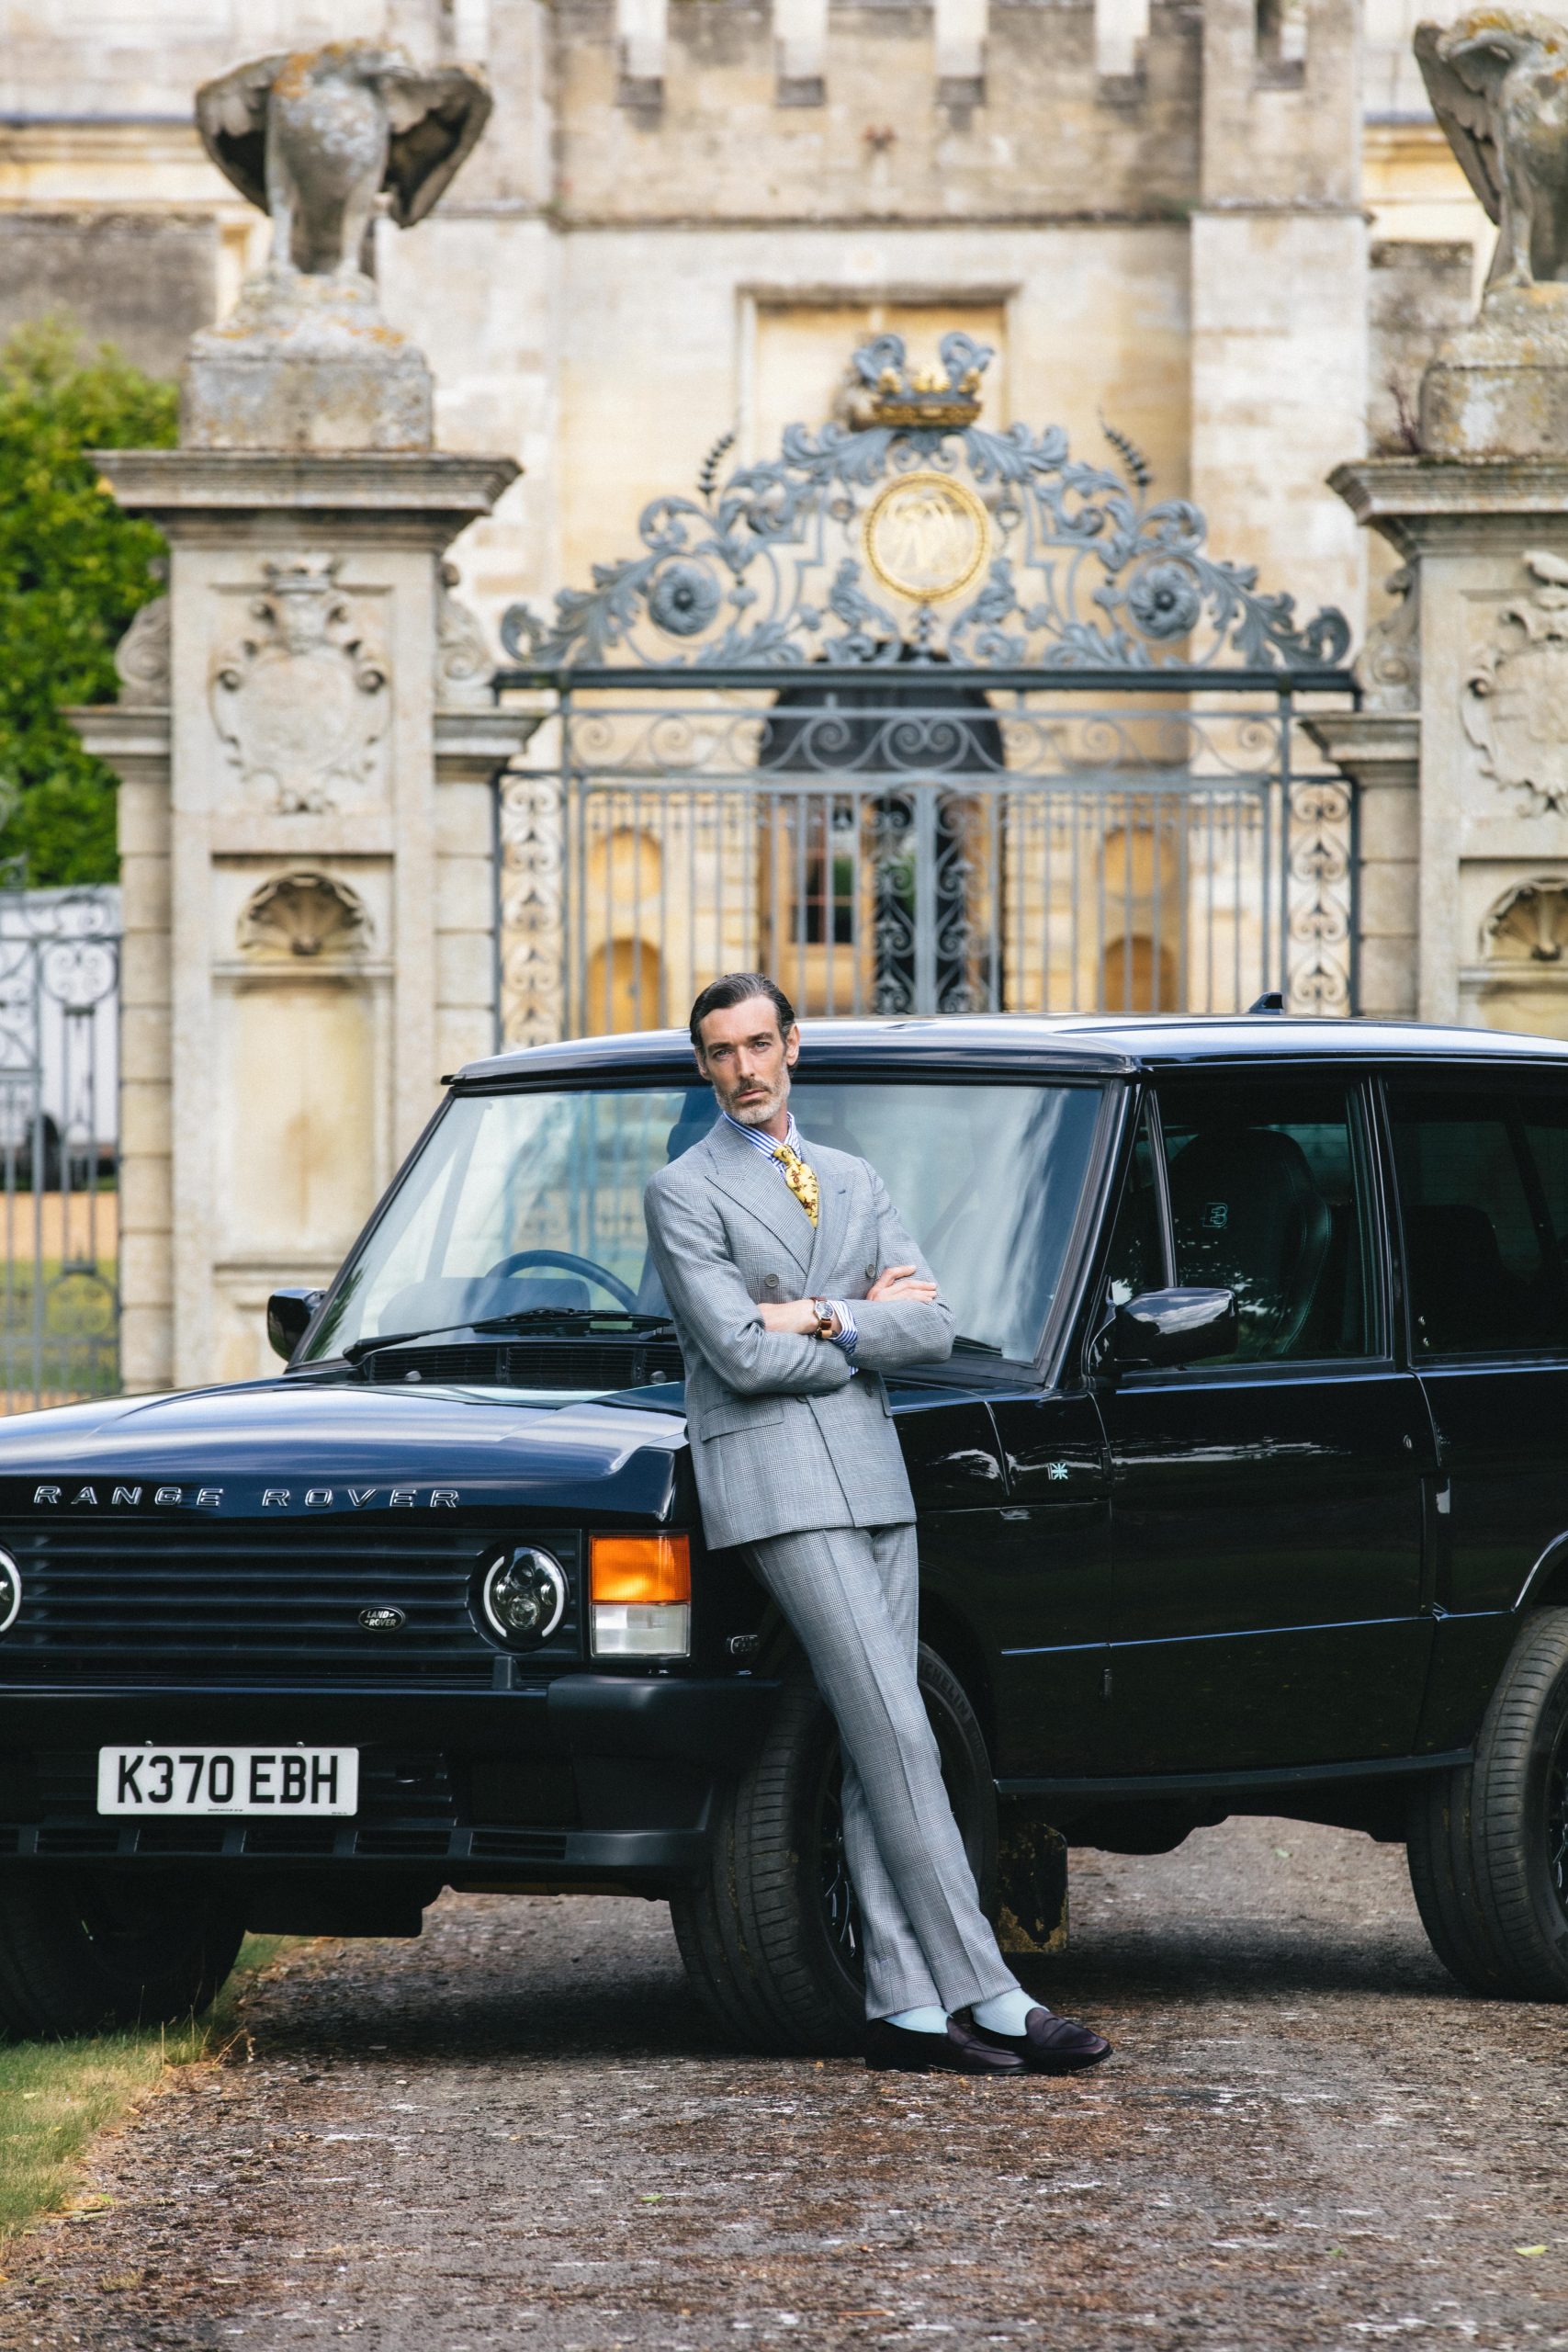 Introducing The Most Beautiful Car In The World, The Rake x Bamford x Bishops Heritage Range Rover.